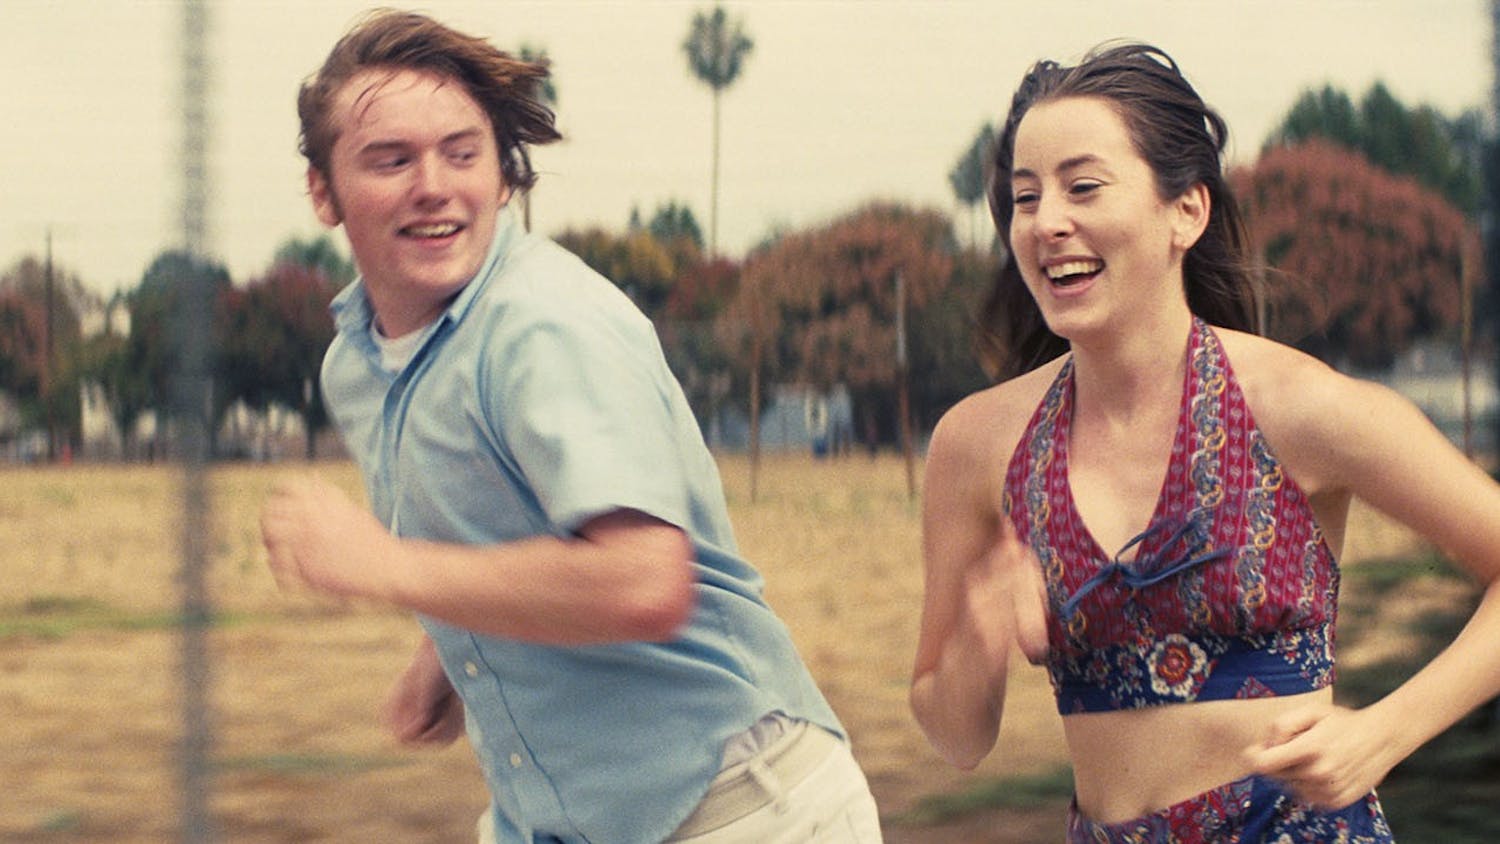 Cooper Hoffman, left, and Alana Haim in the movie "Licorice Pizza."